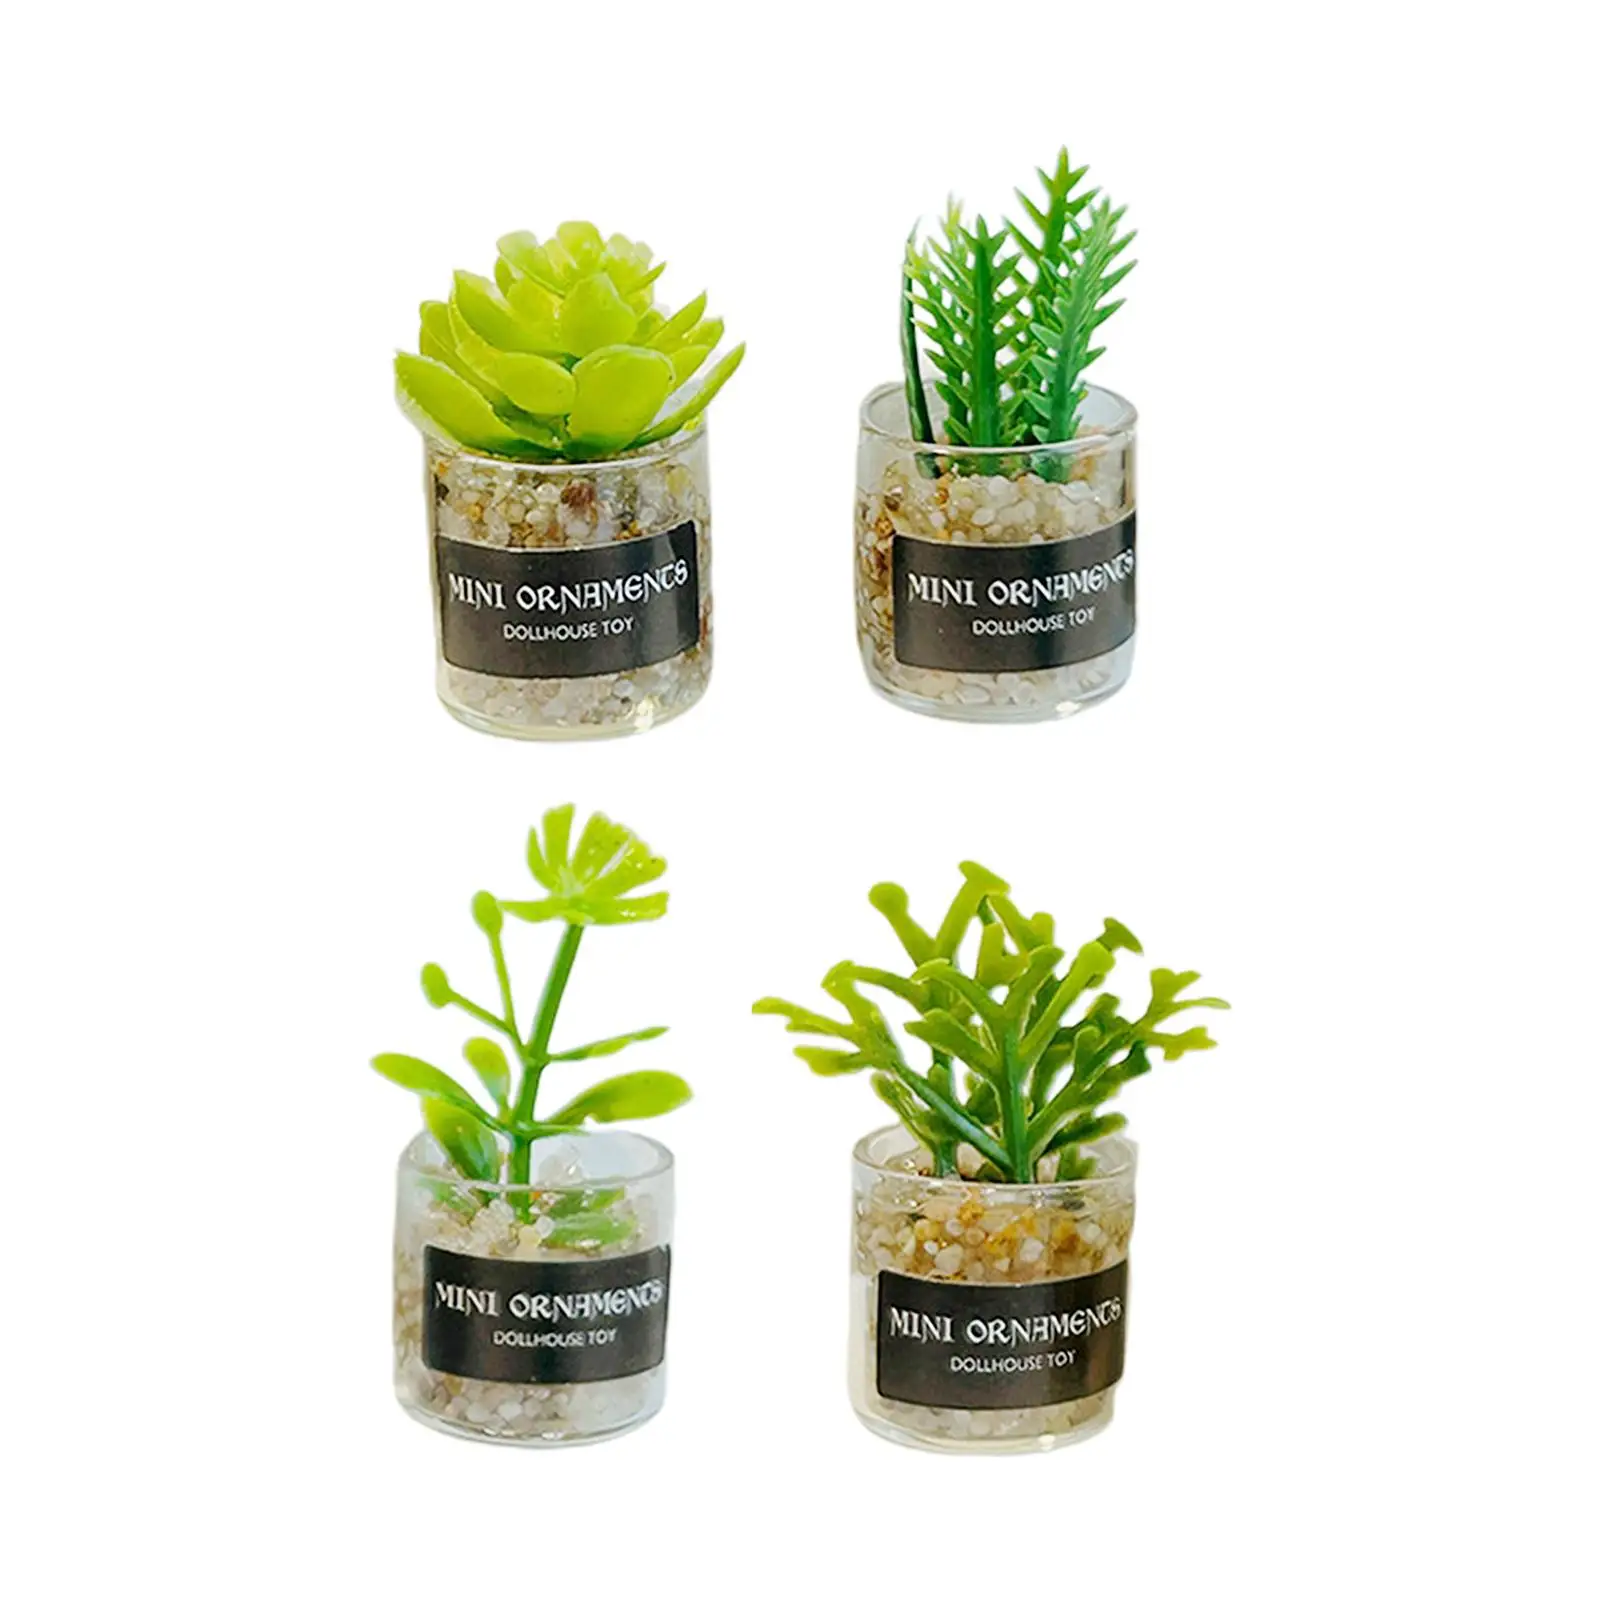 4 Pieces 1/12 Dolls House Miniature Plants Model Fake Greenery Potted Plants Simulation Plants for Dollhouse Fairy Garden Room